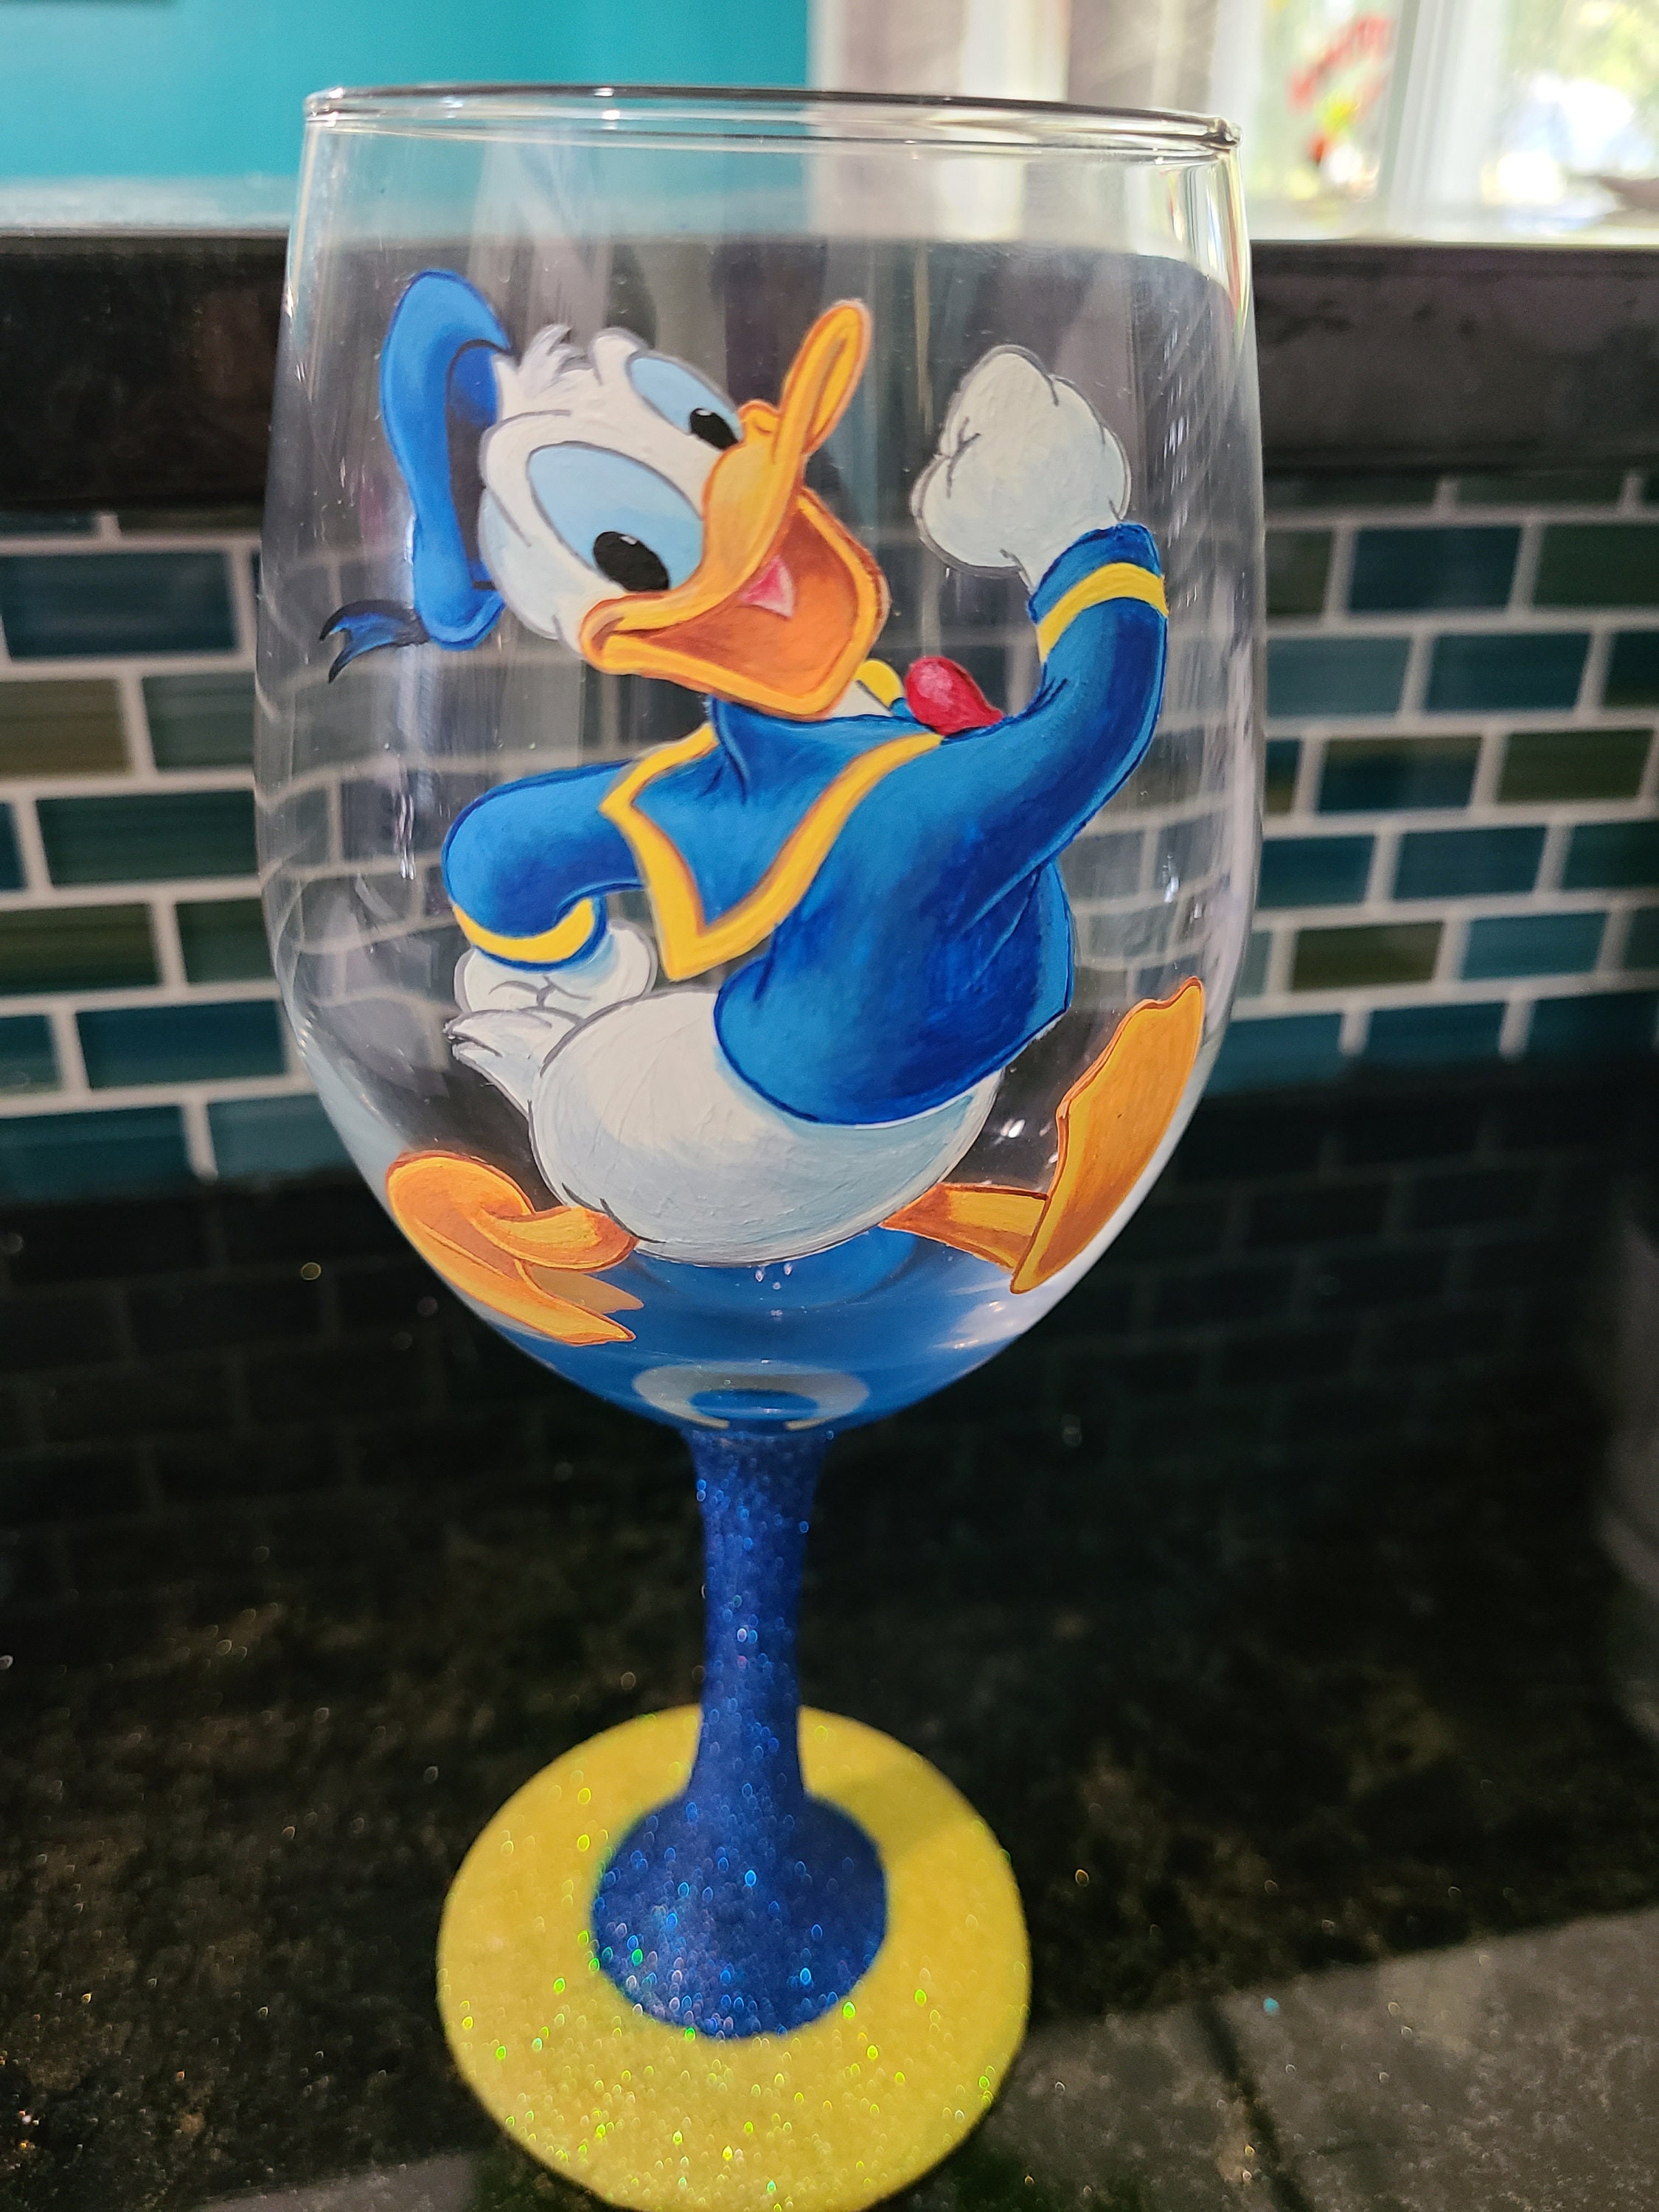 Disney Squad Stemless Drinking Glass, Set of 4, Mickey, Pluto, Donald, and  Goofy Glasses